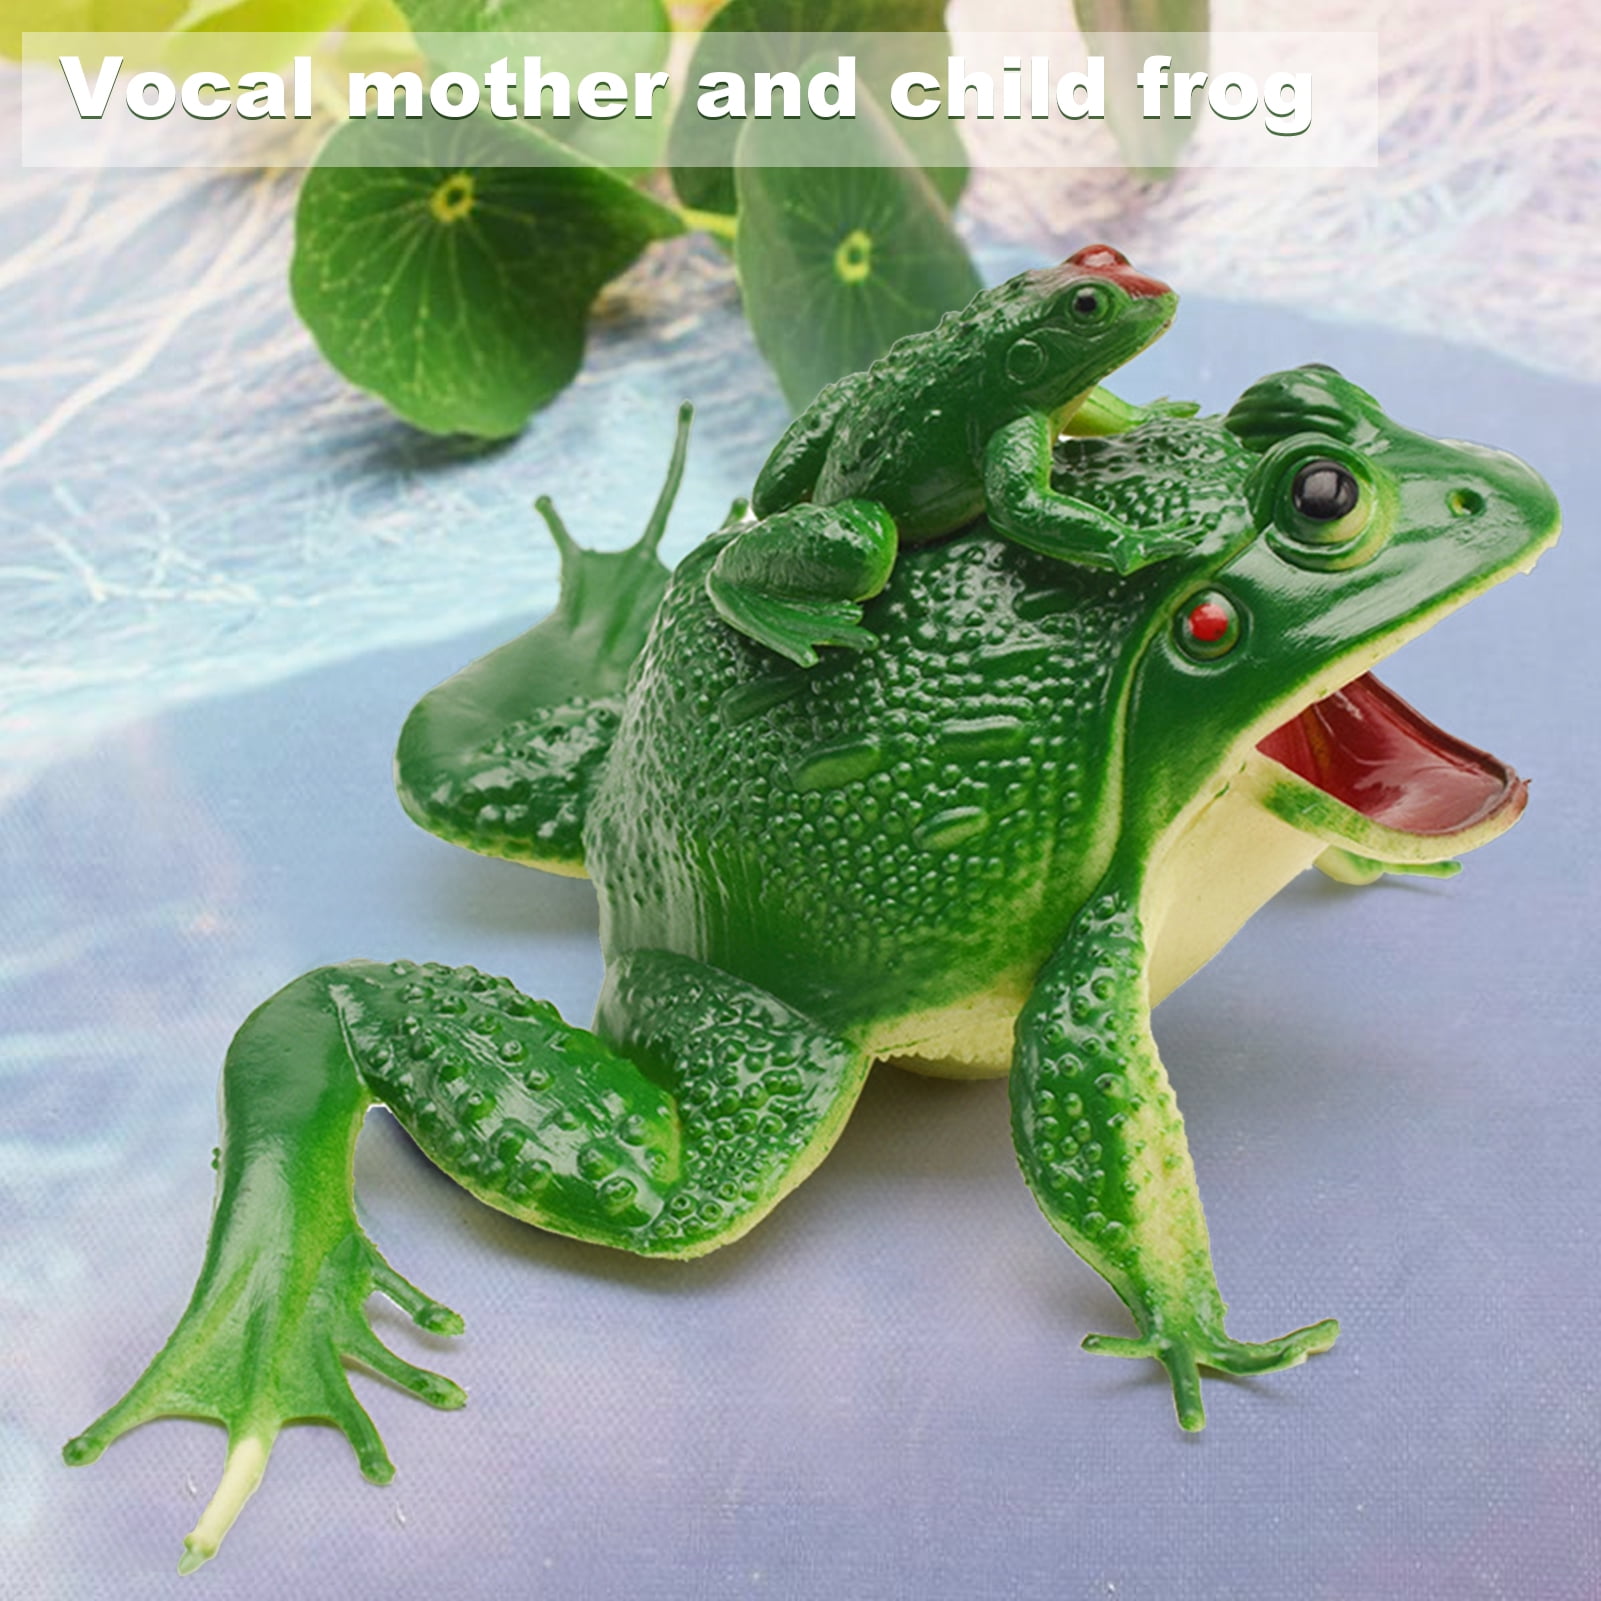 Toy Frog Prop Screaming Frogs Prank Toys Tricky Realistic Toad Animal Mini Plastic Model Figures Simulation Sounding